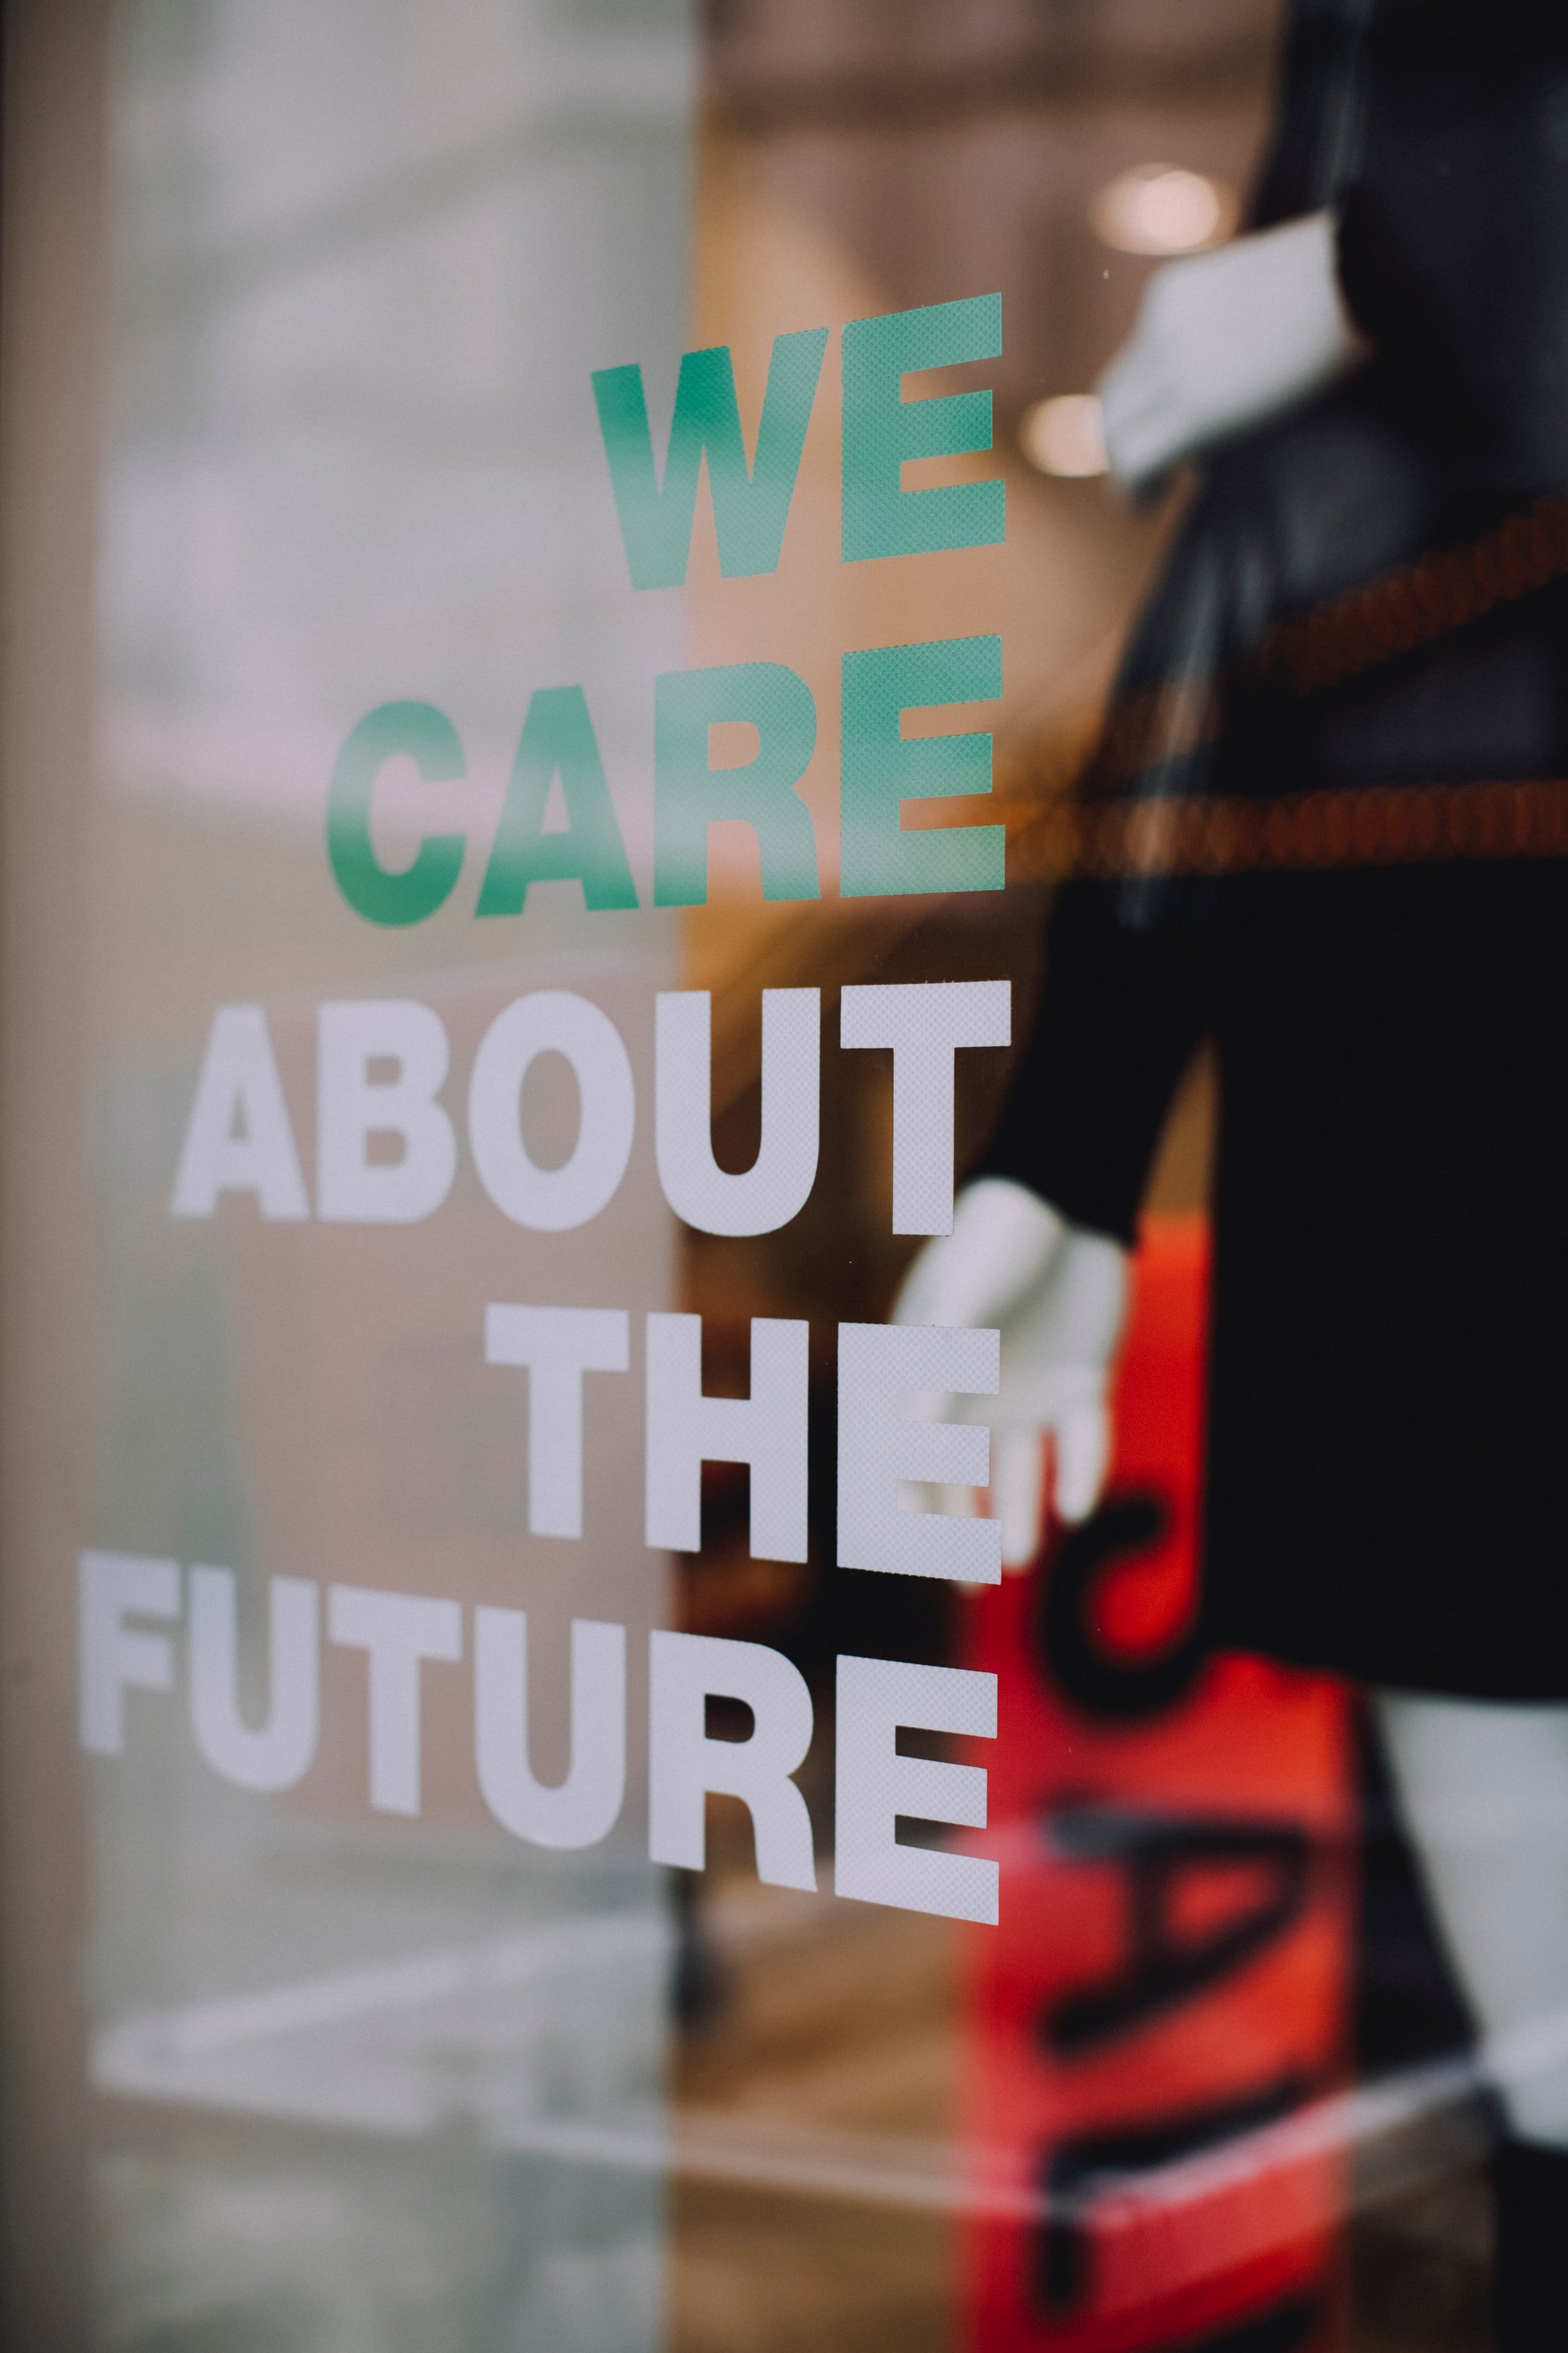 Text about caring for the future on a window sticker